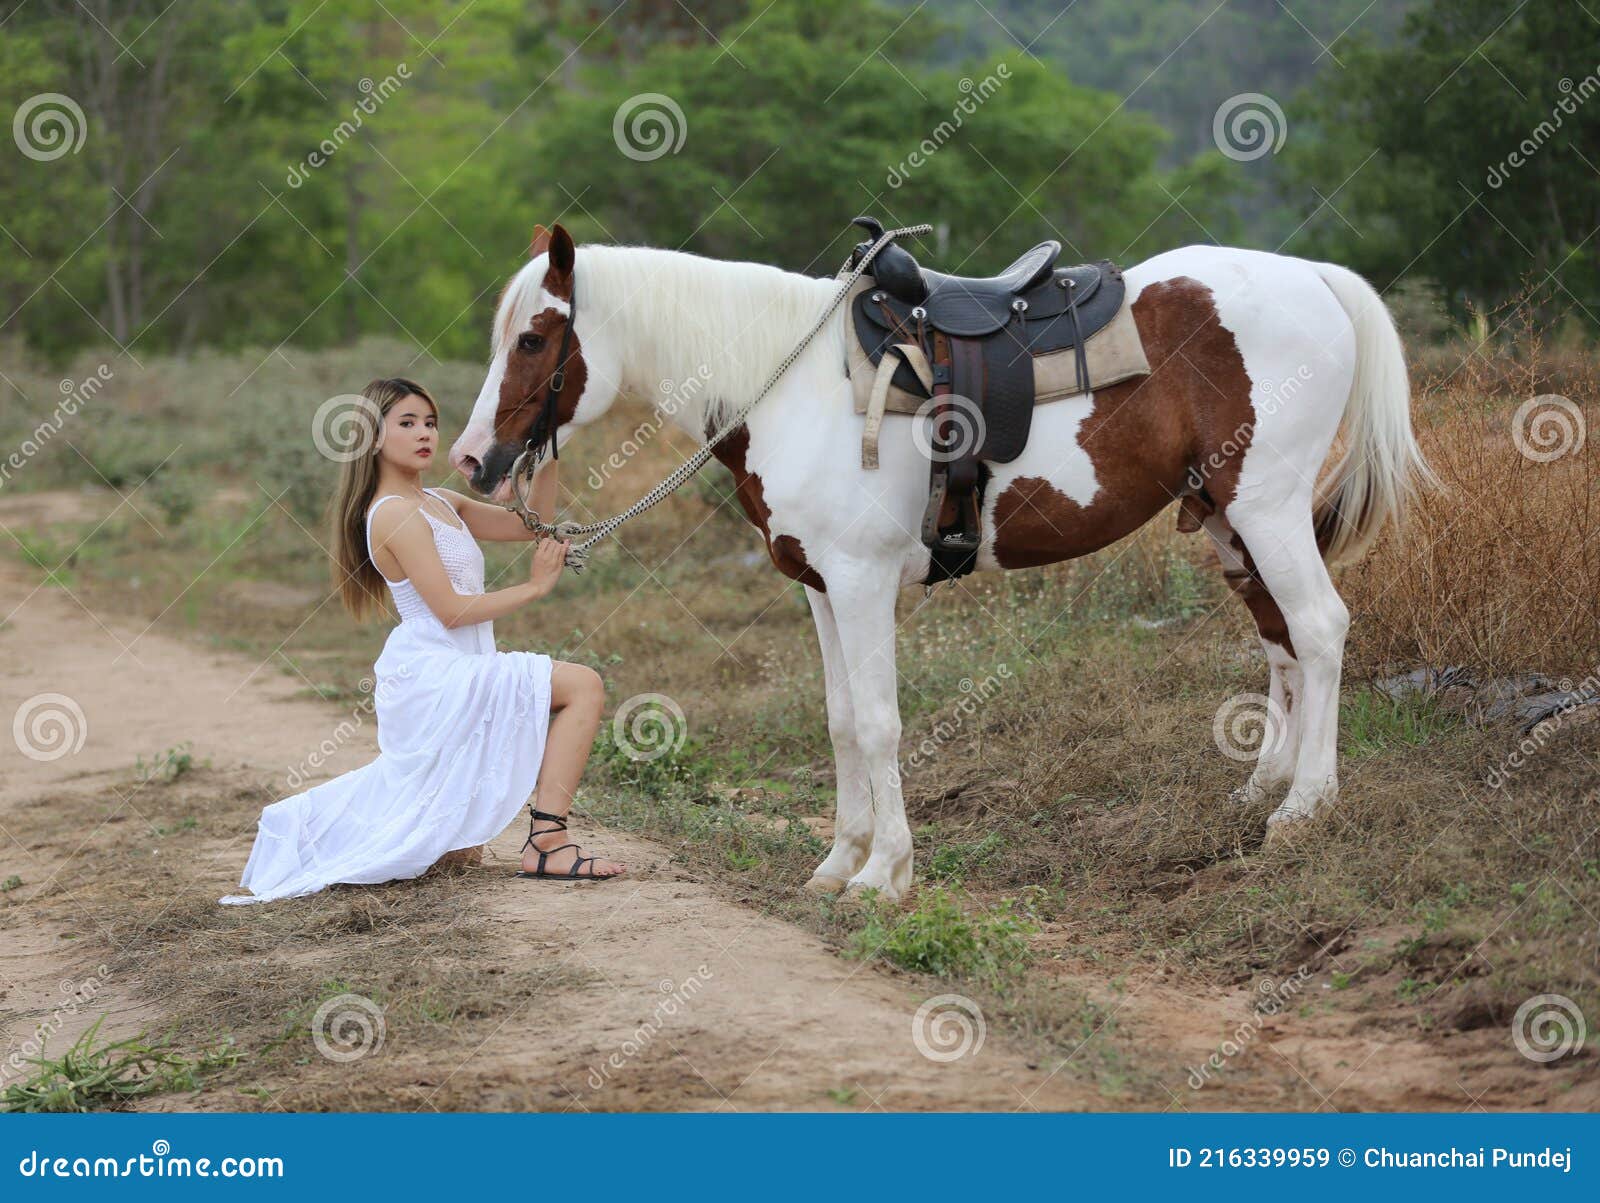 A Young Girl Wearing a White Dress Standing Beside a Horse under